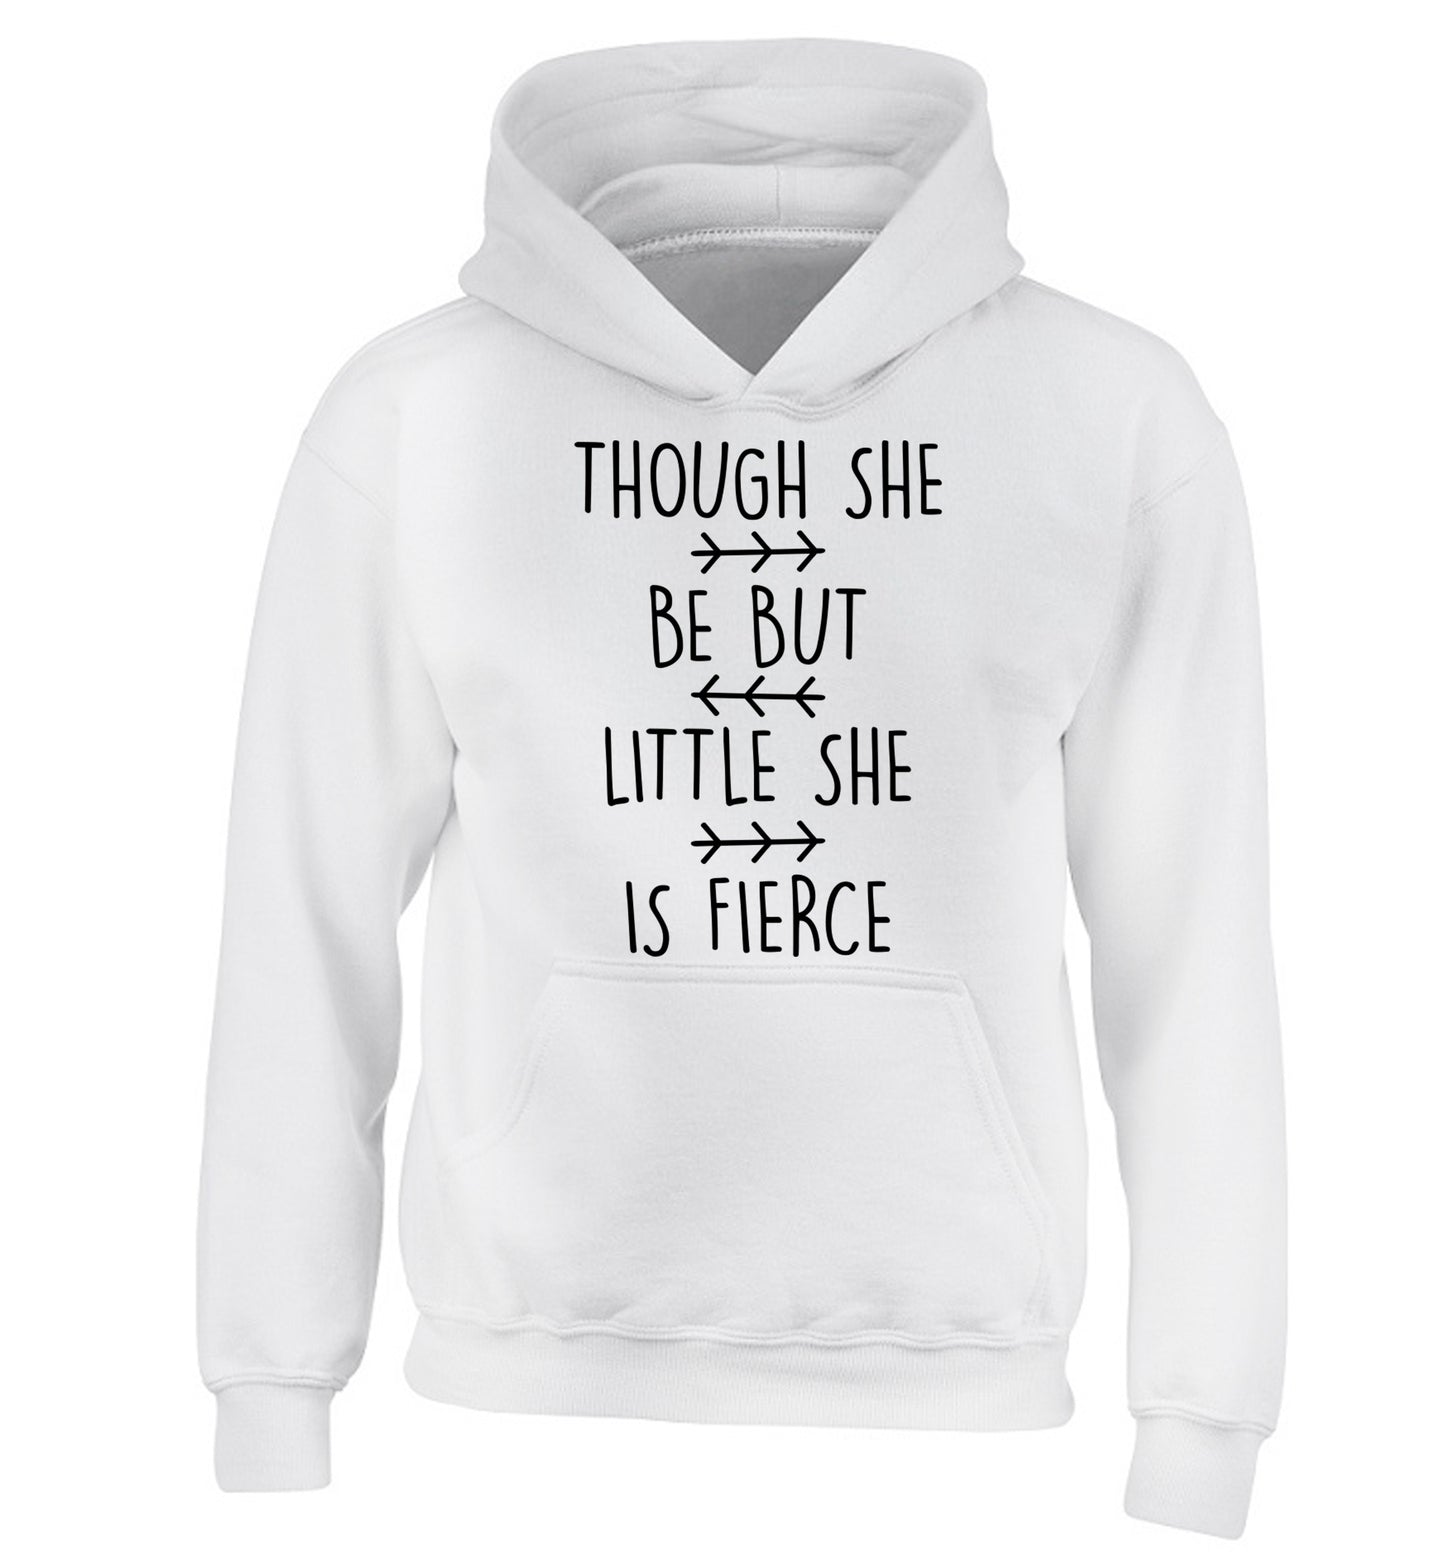 Though she be little she be fierce children's white hoodie 12-14 Years